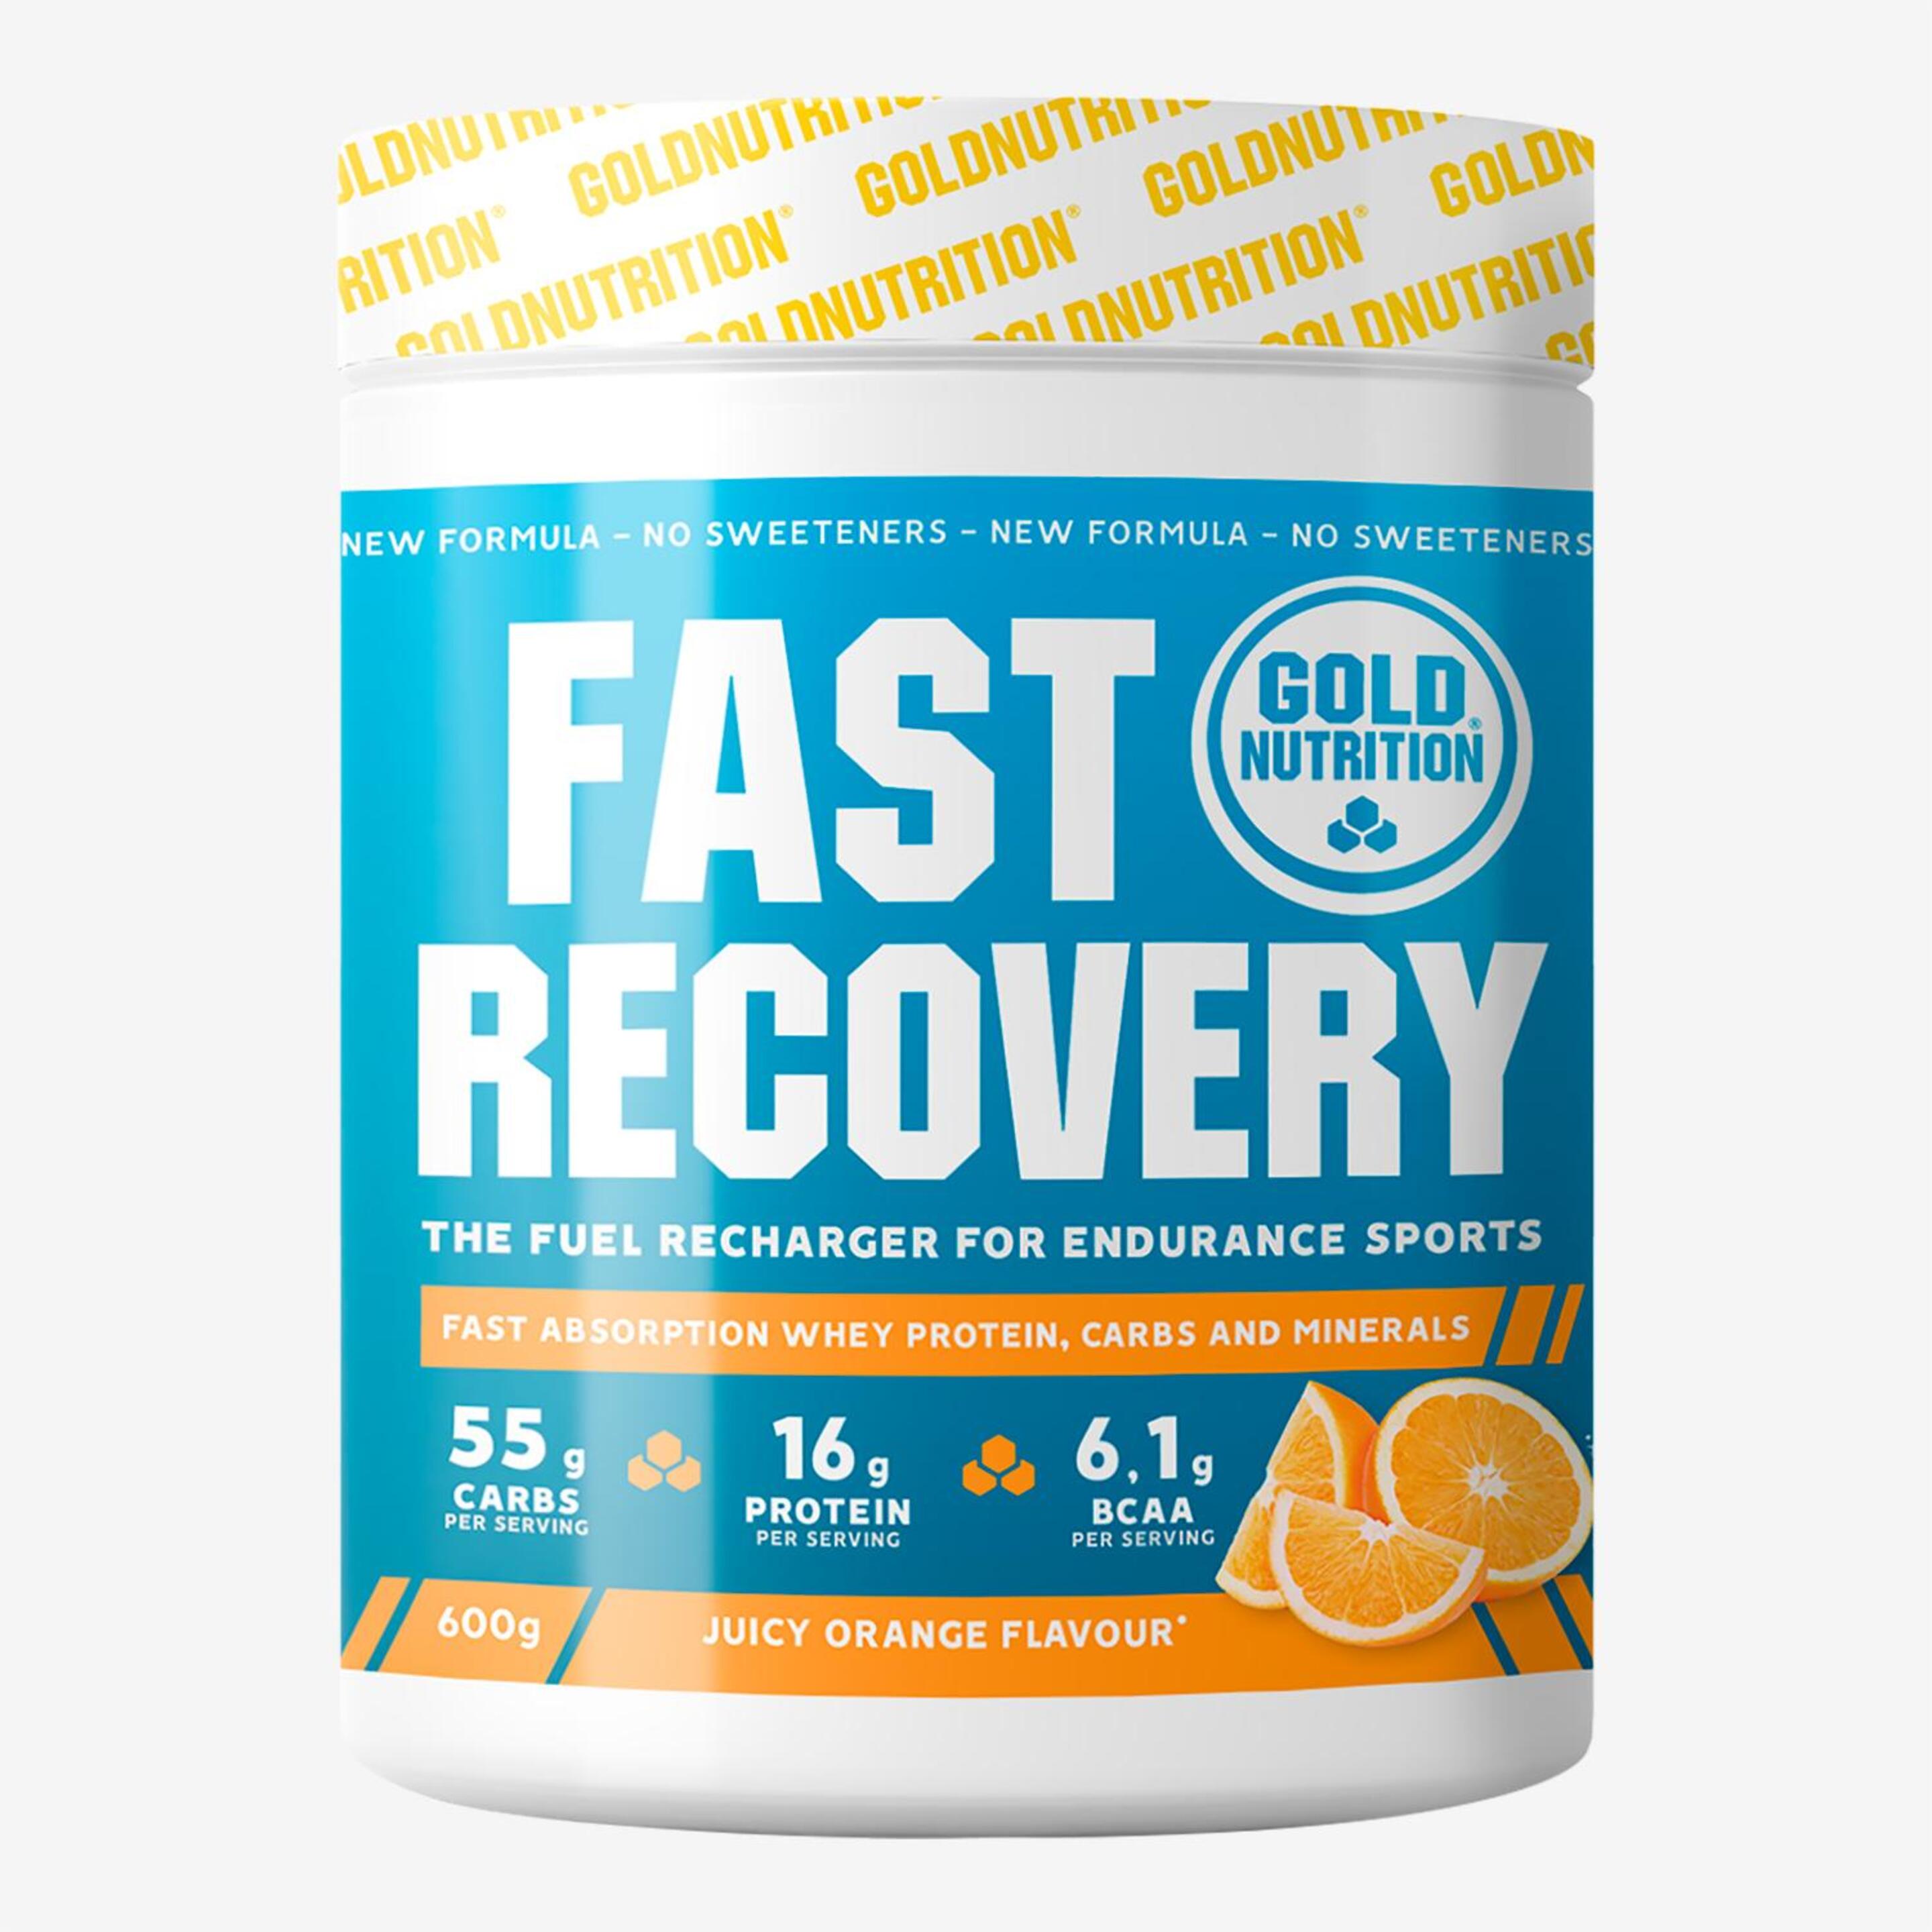 Goldnutrition Fast Recovery 600g - unico - Recuperador Muscular